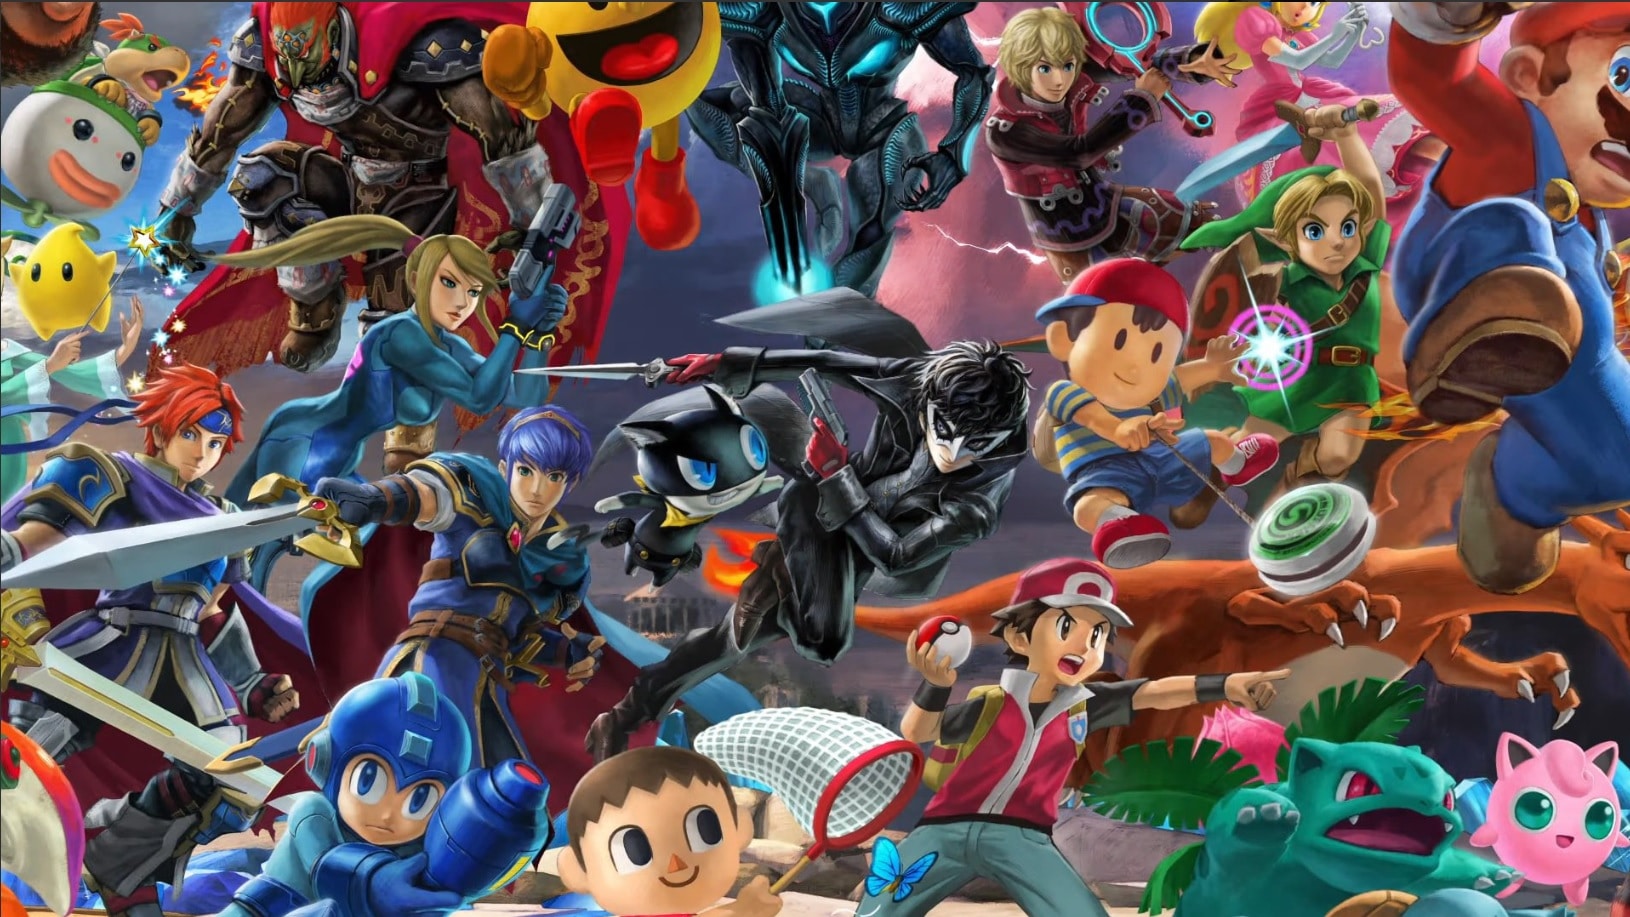 How to download super smash bros ultimate on pc g703 software download